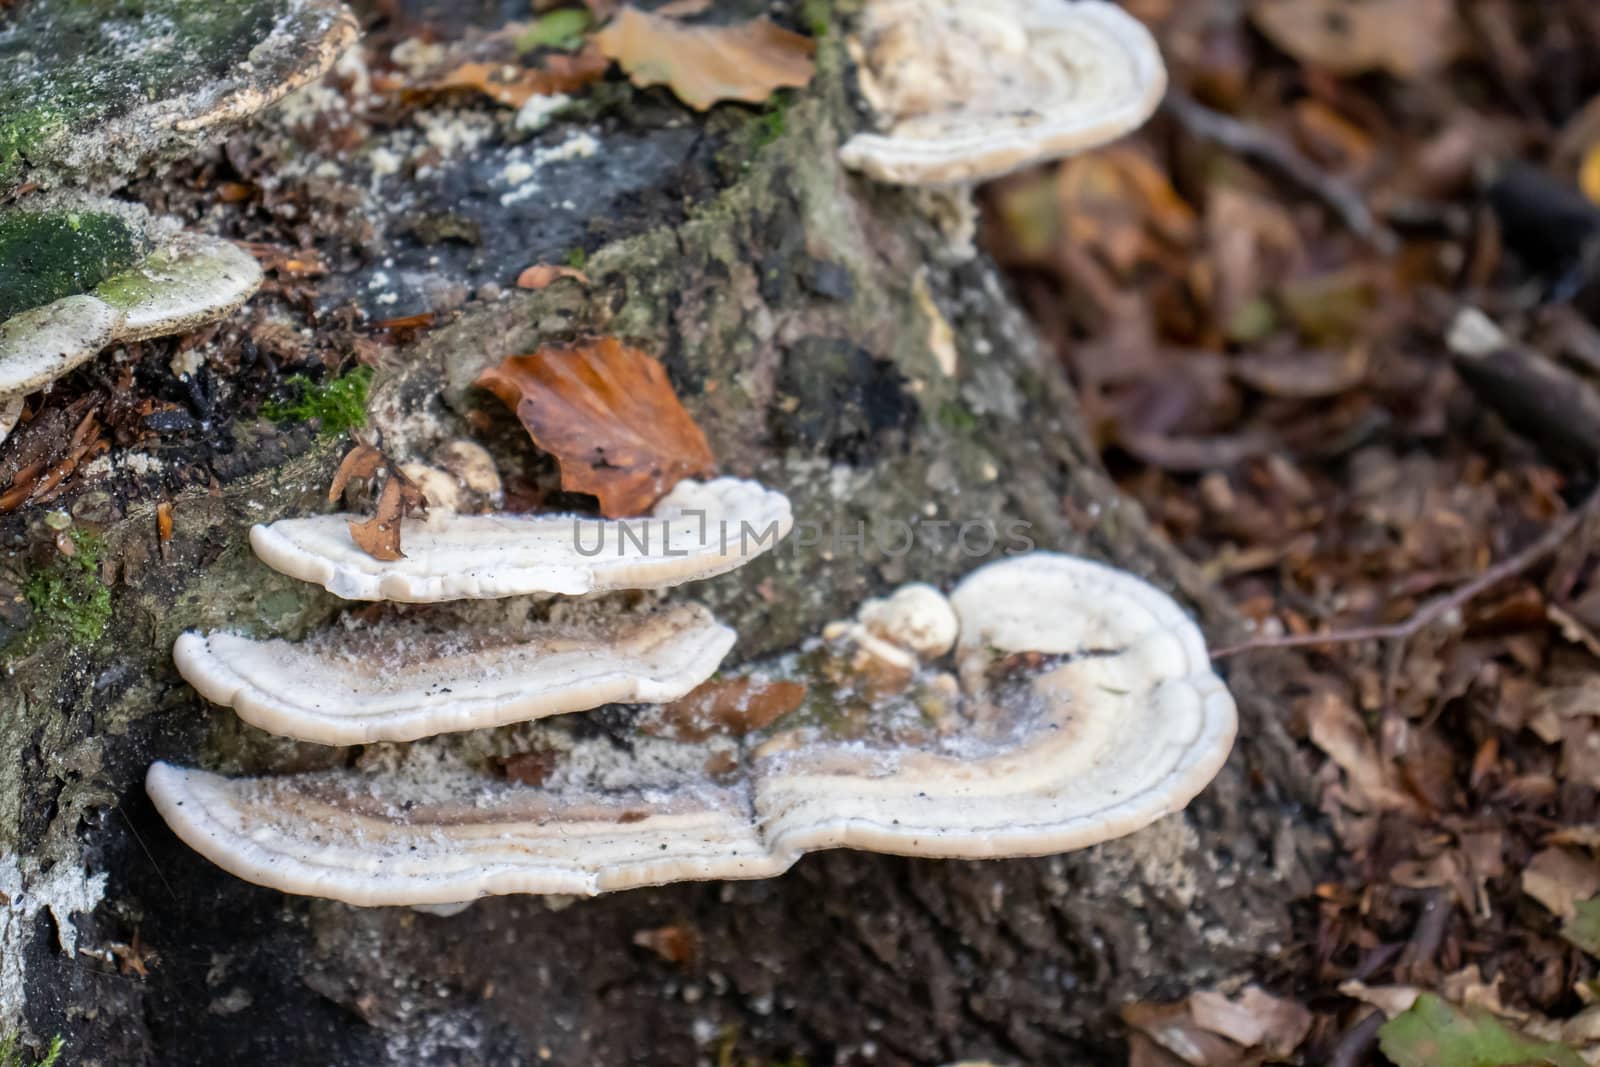 white woody mushroom, mushrooms coming out of a tree trunk in the forest.